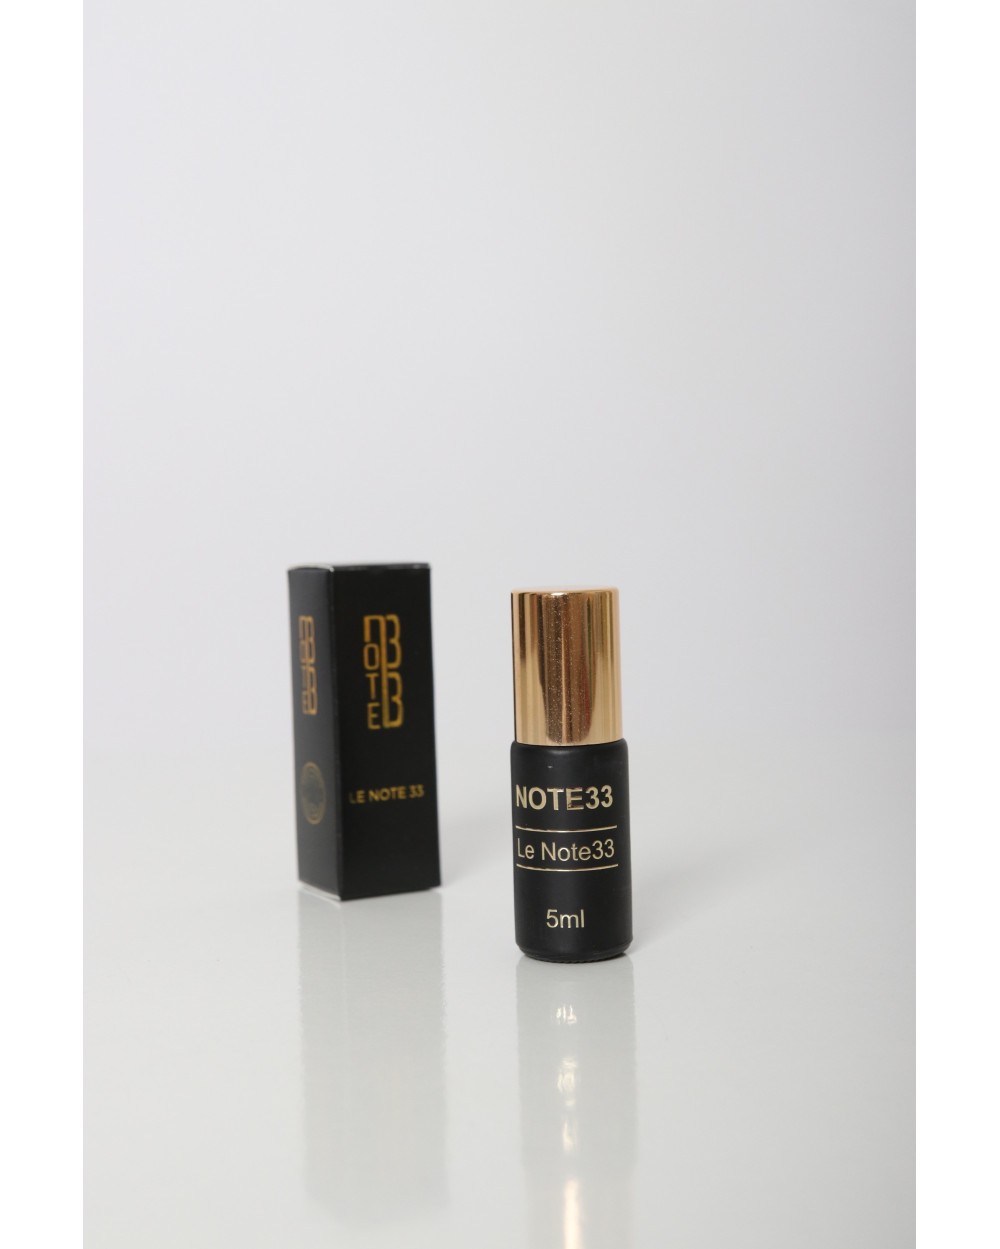 Perfume "note 33" Musk 5ml roll on